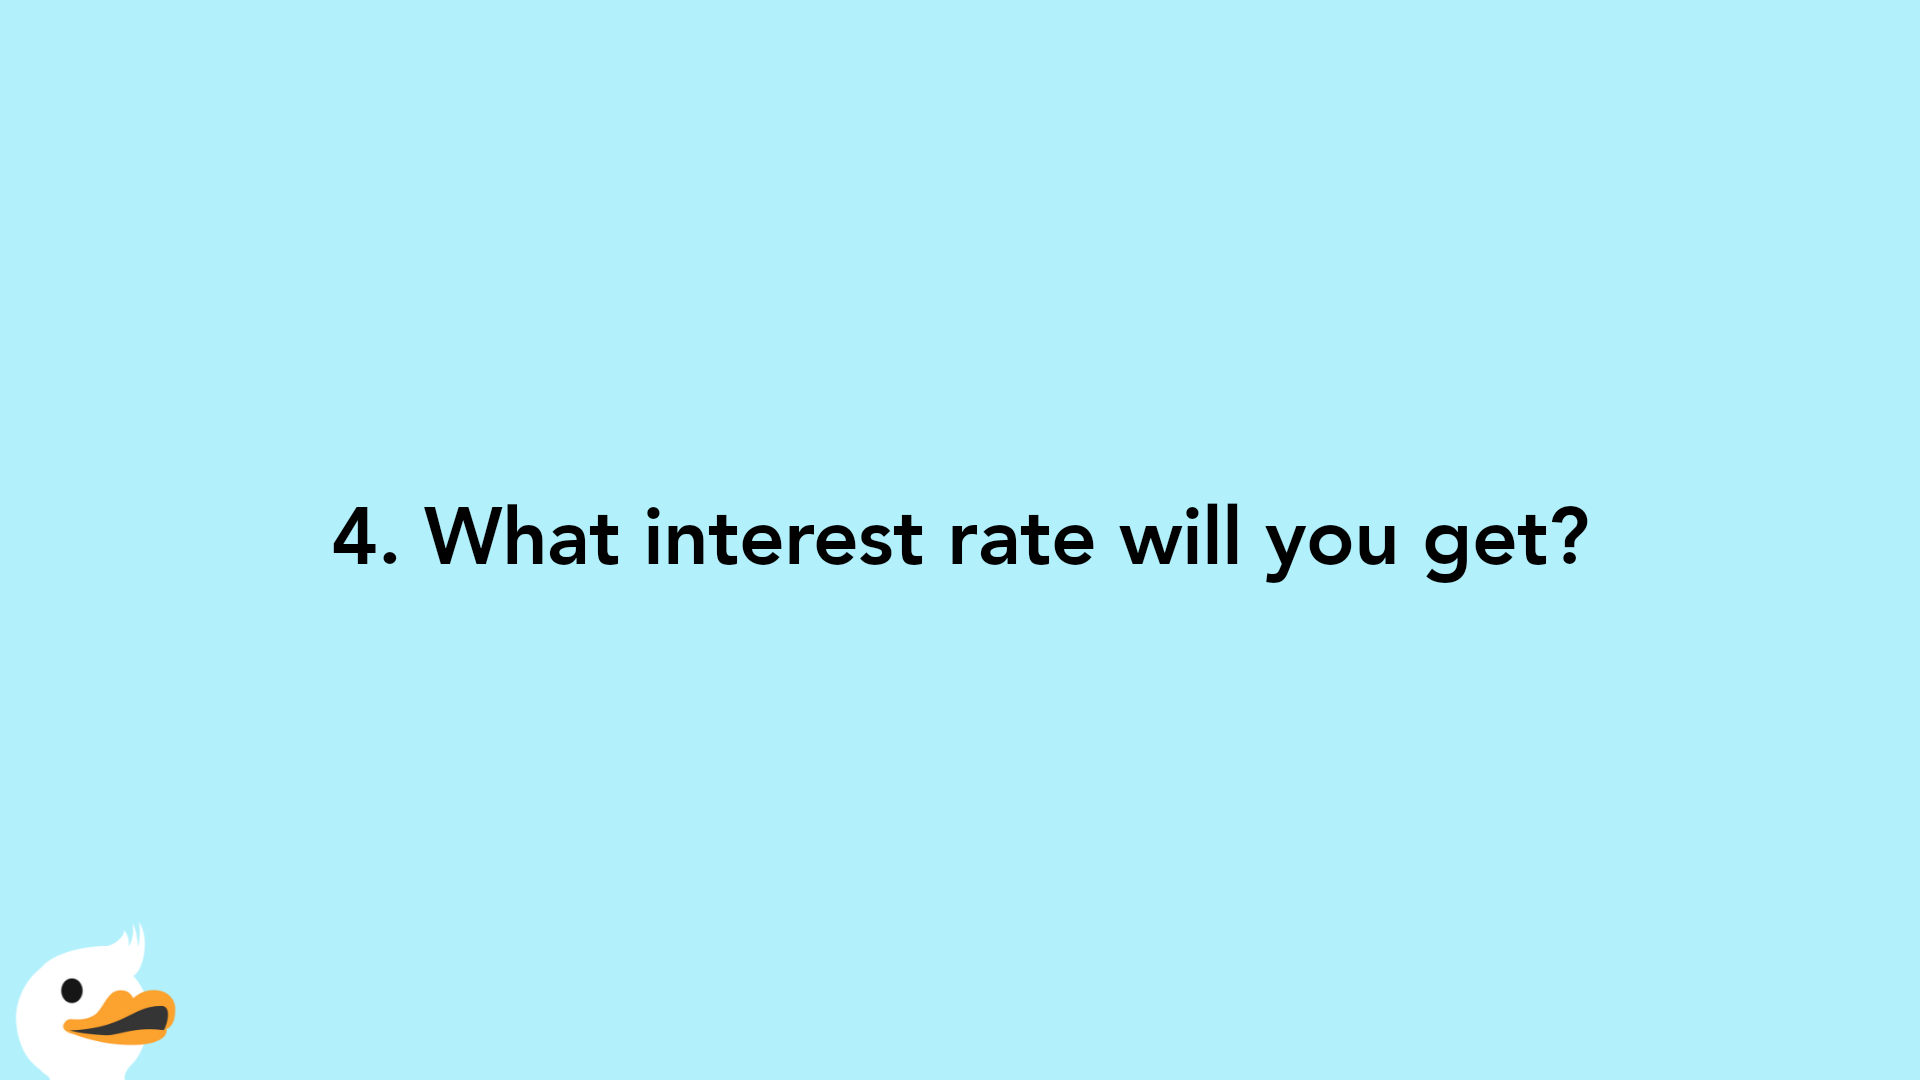 4. What interest rate will you get?